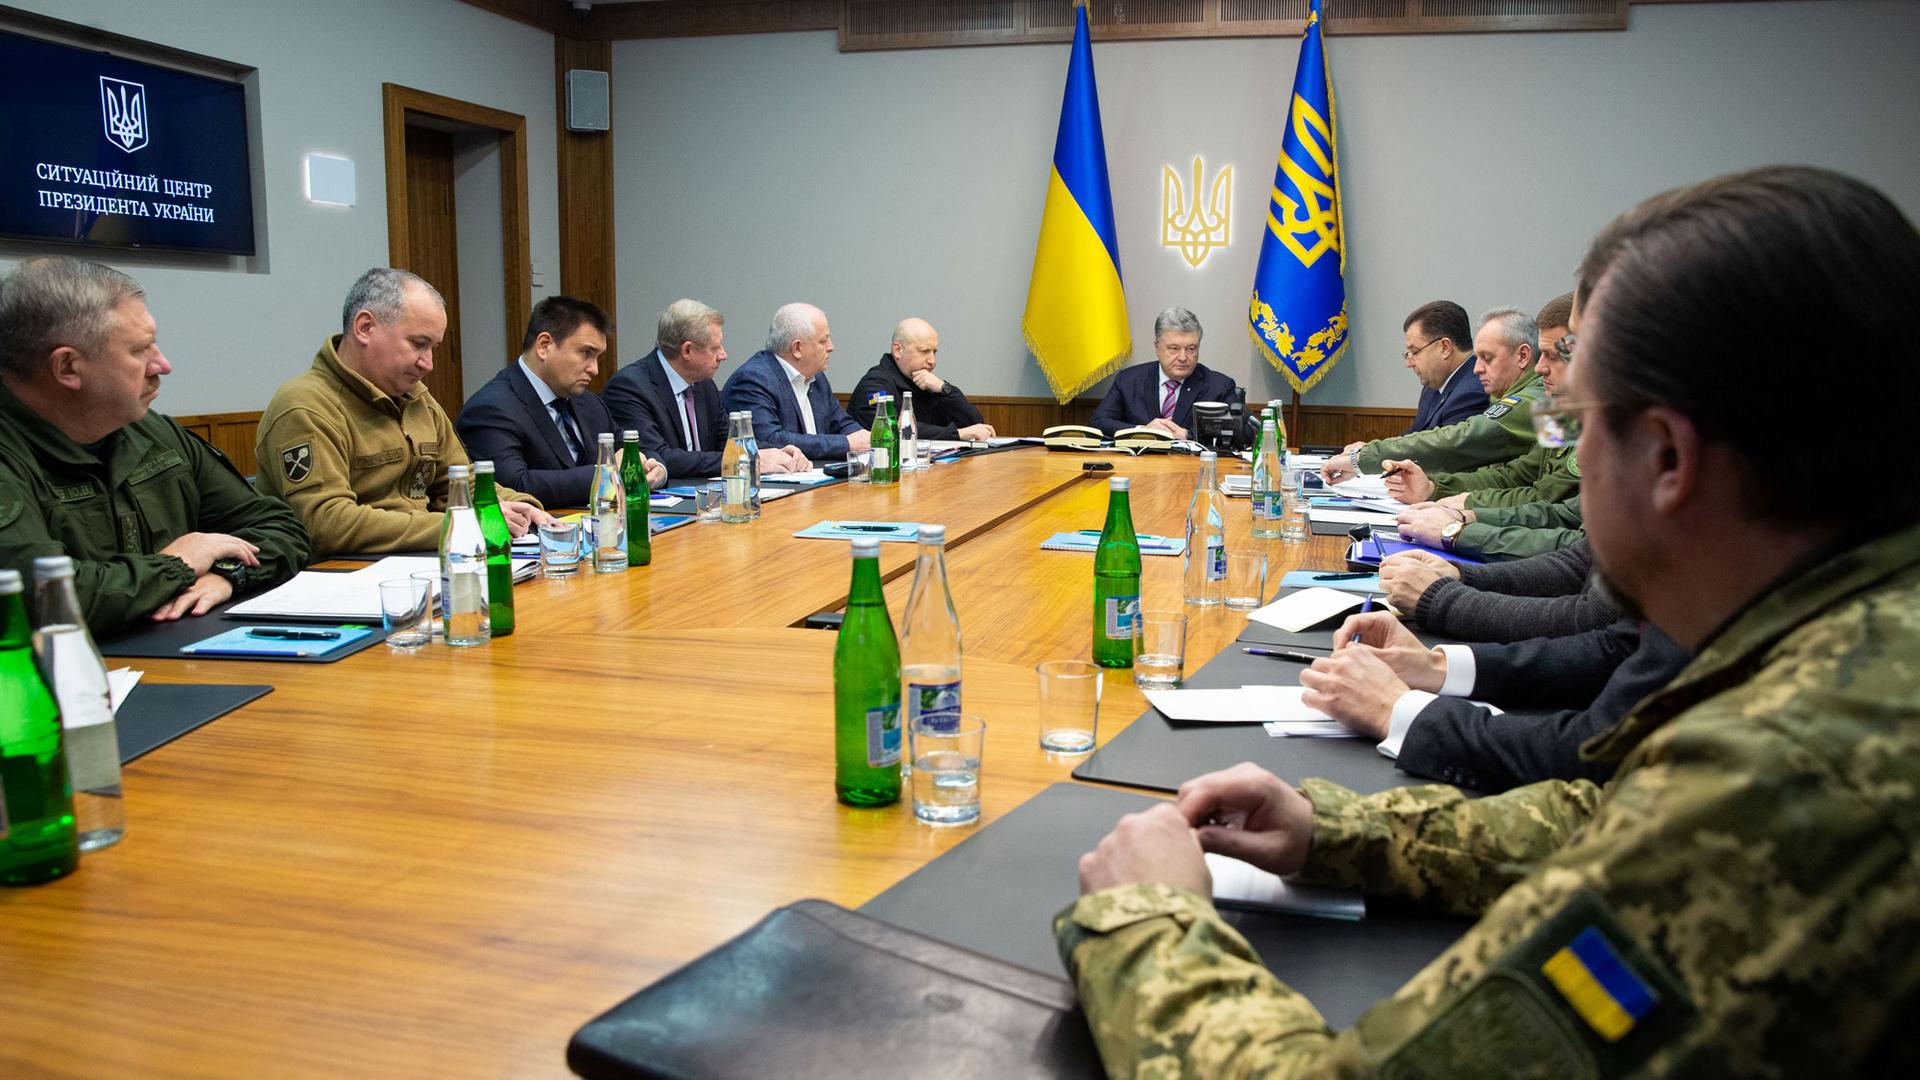 Ukrainian President Petro Poroshenko is shown sitting at the end of a table chairing a meeting with heads of military and security forces in Kiev, Ukraine, Nov. 30, 2018.